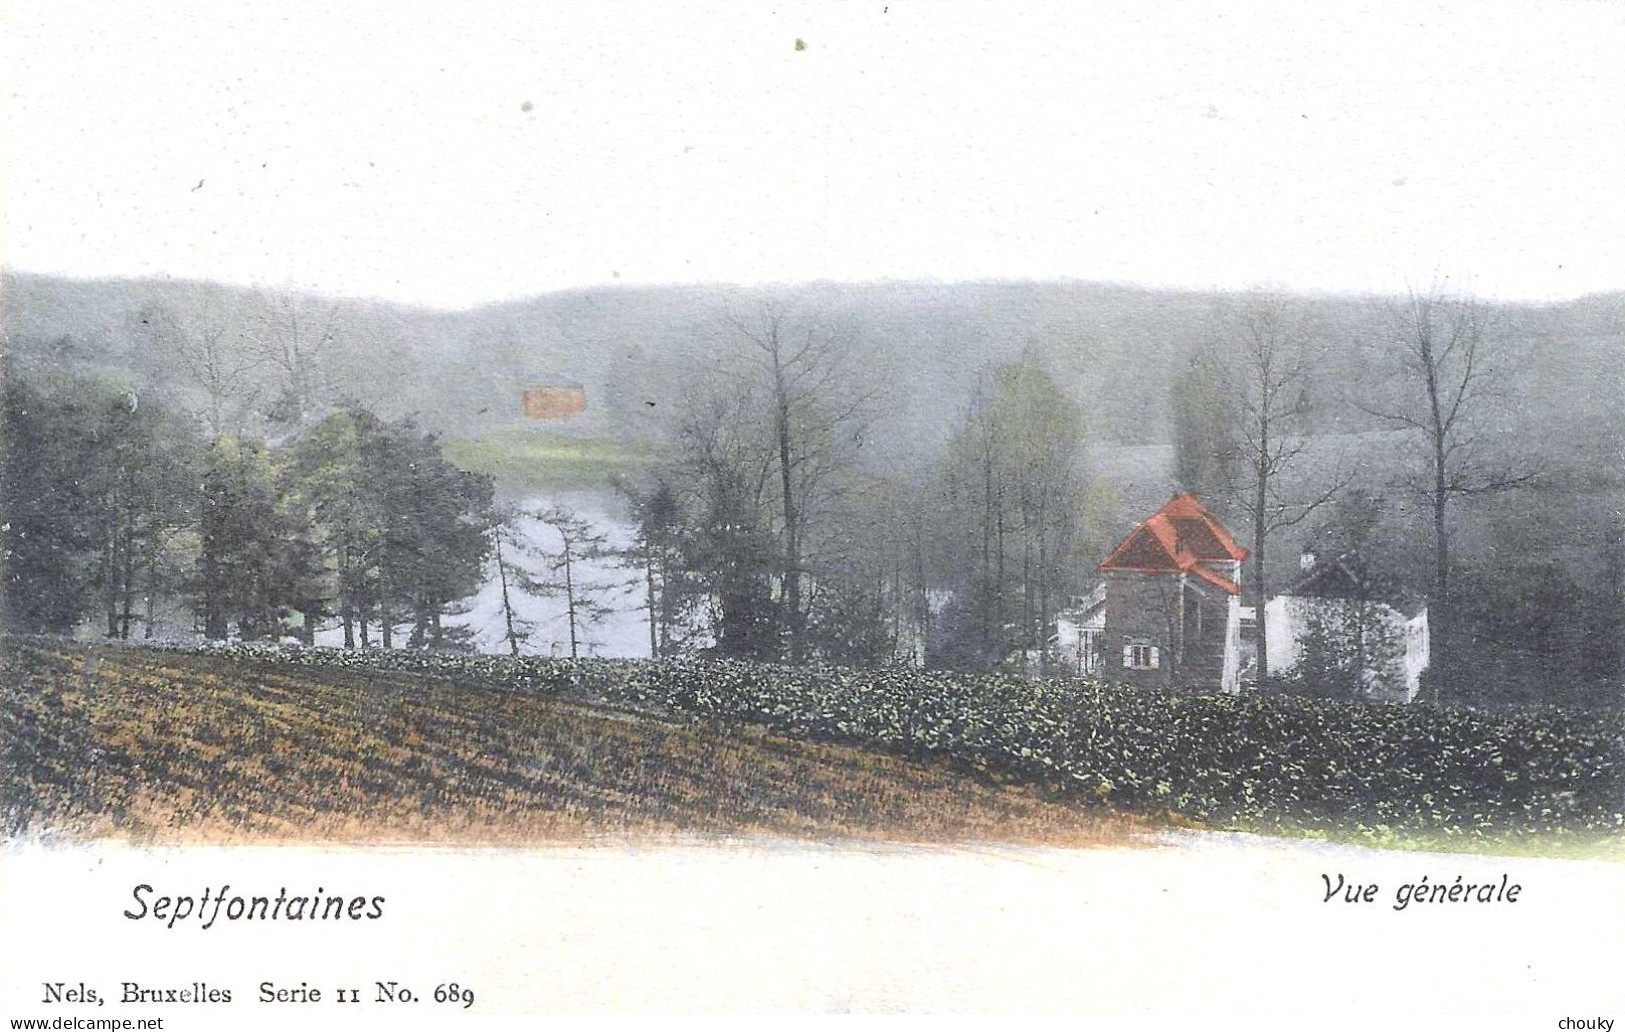 Septfontaines (1905) - St-Genesius-Rode